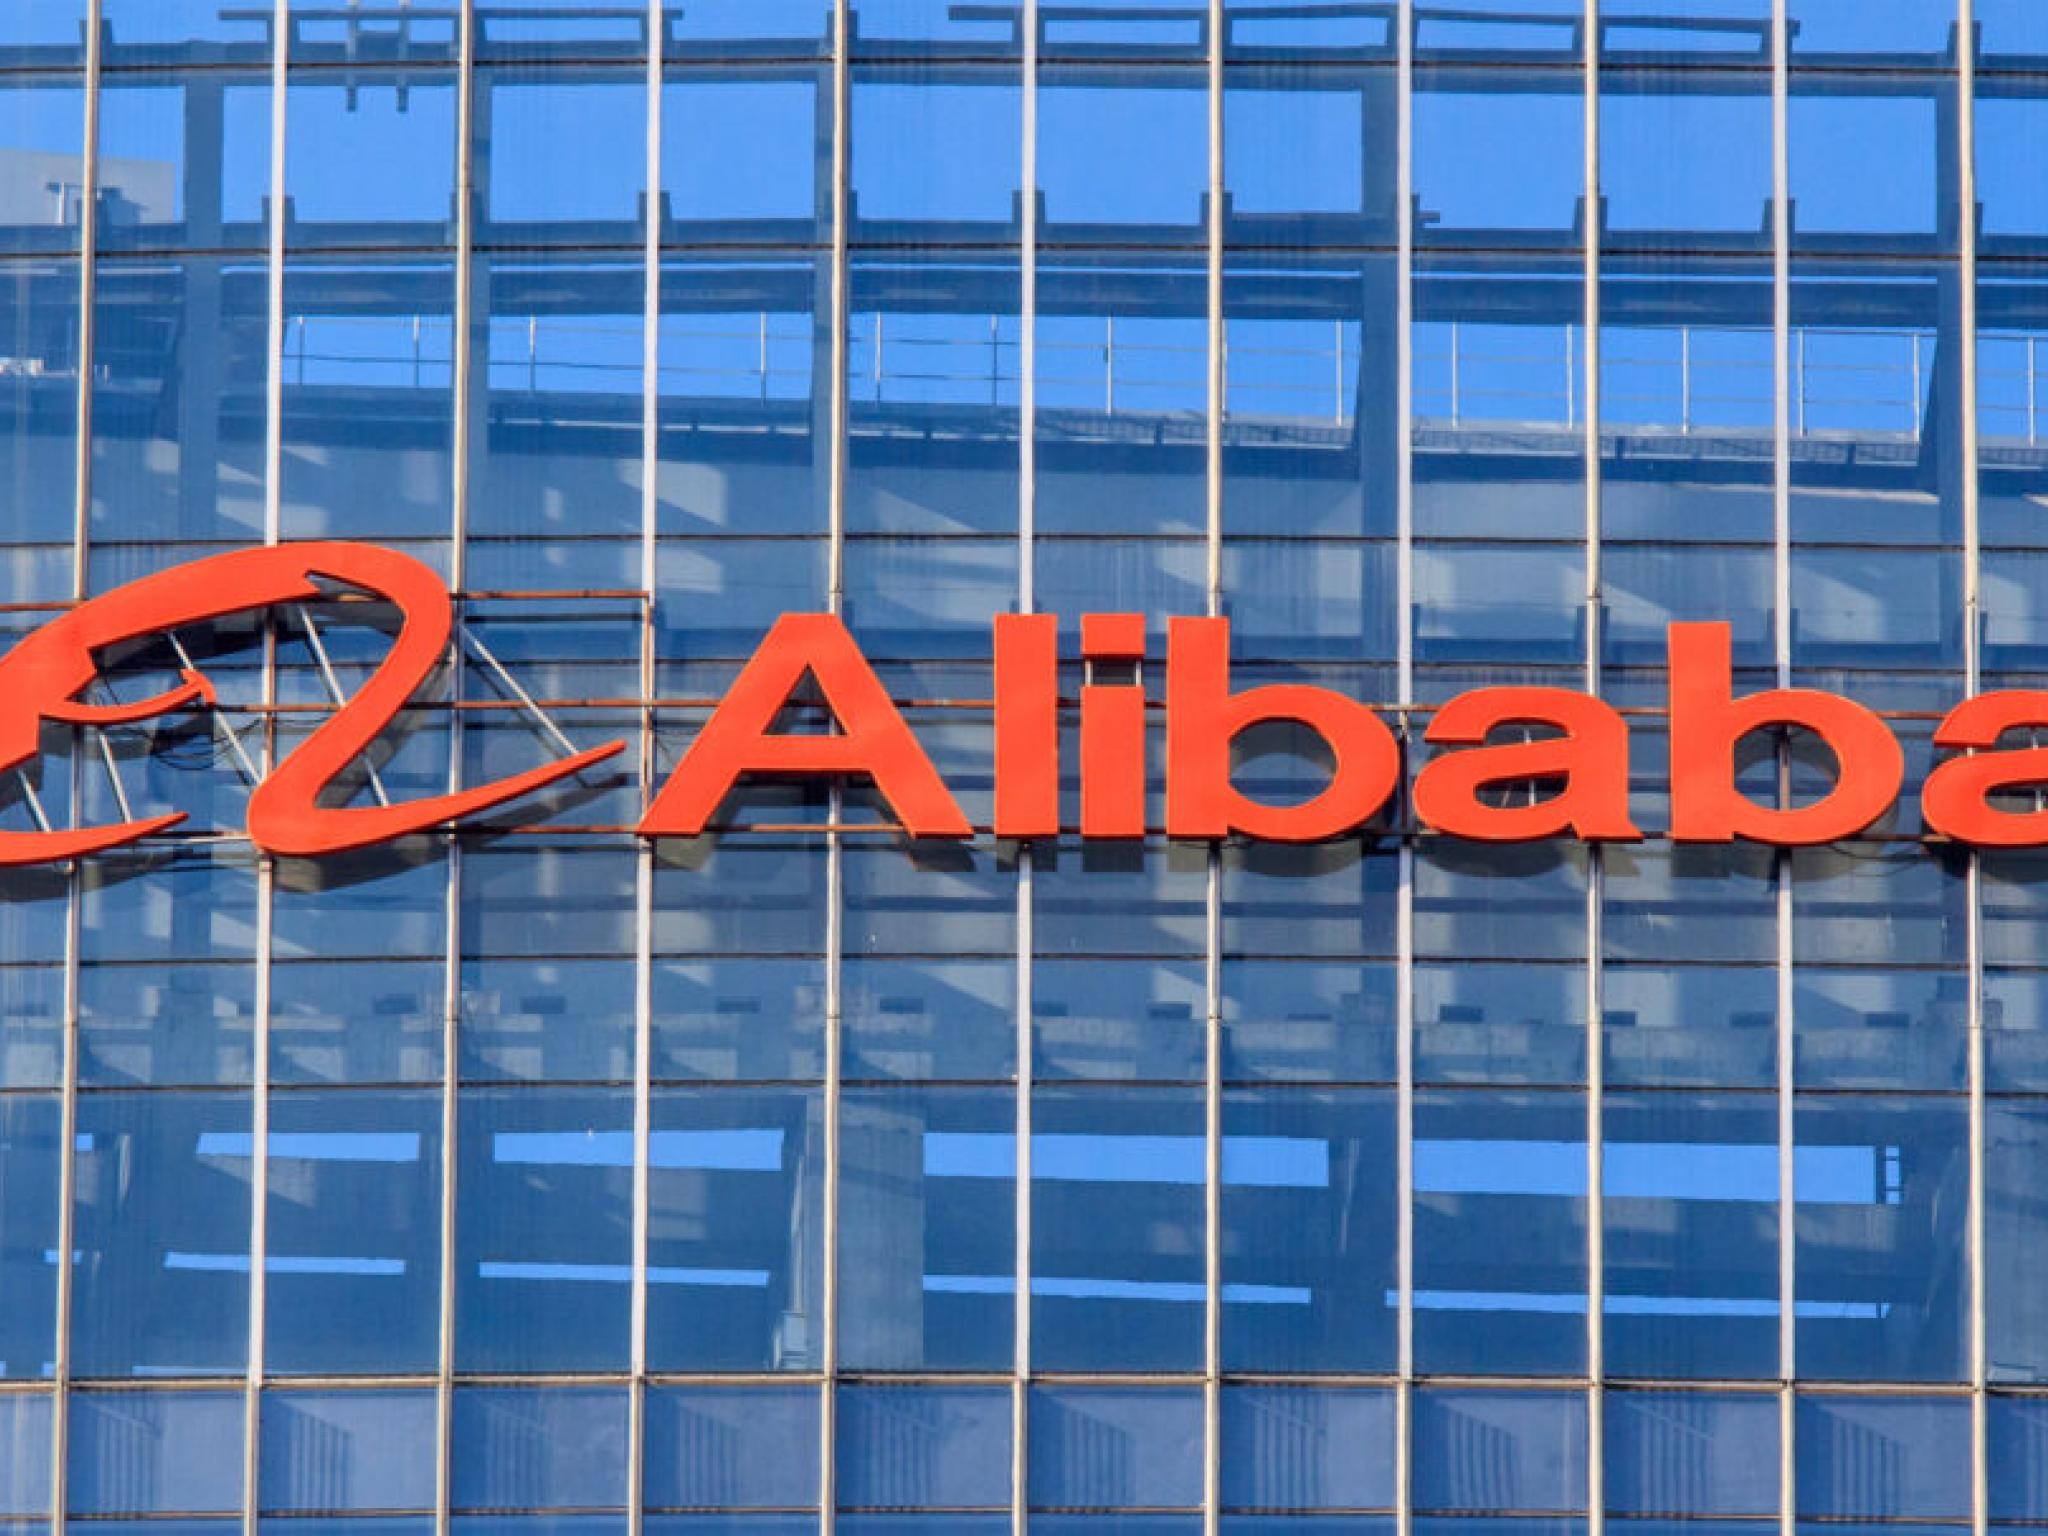  alibaba-analysts-look-for-signs-of-q4-rebound-cloud-business-could-record-double-digit-growth-in-2025 